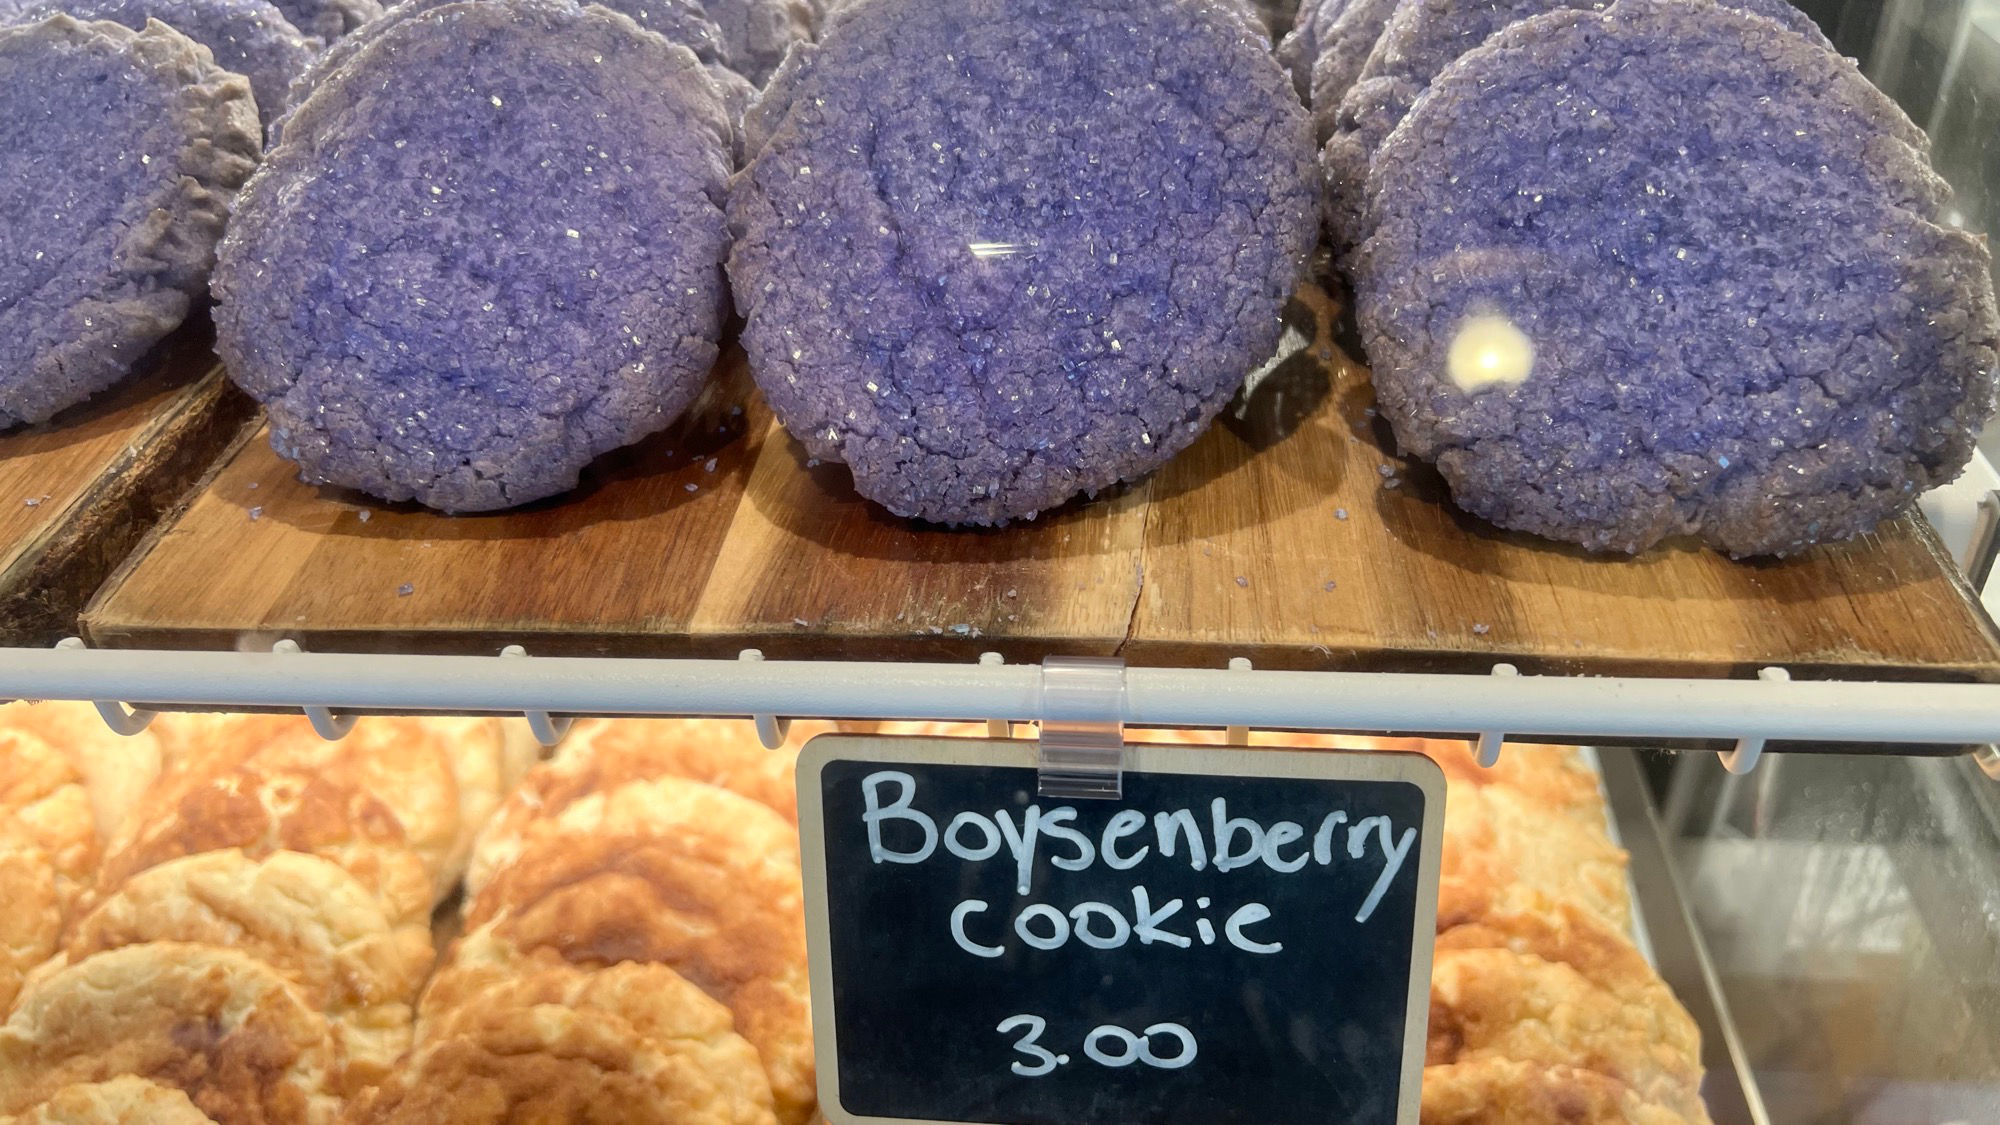 Ghost Town Bakery Boysenberry Cookie